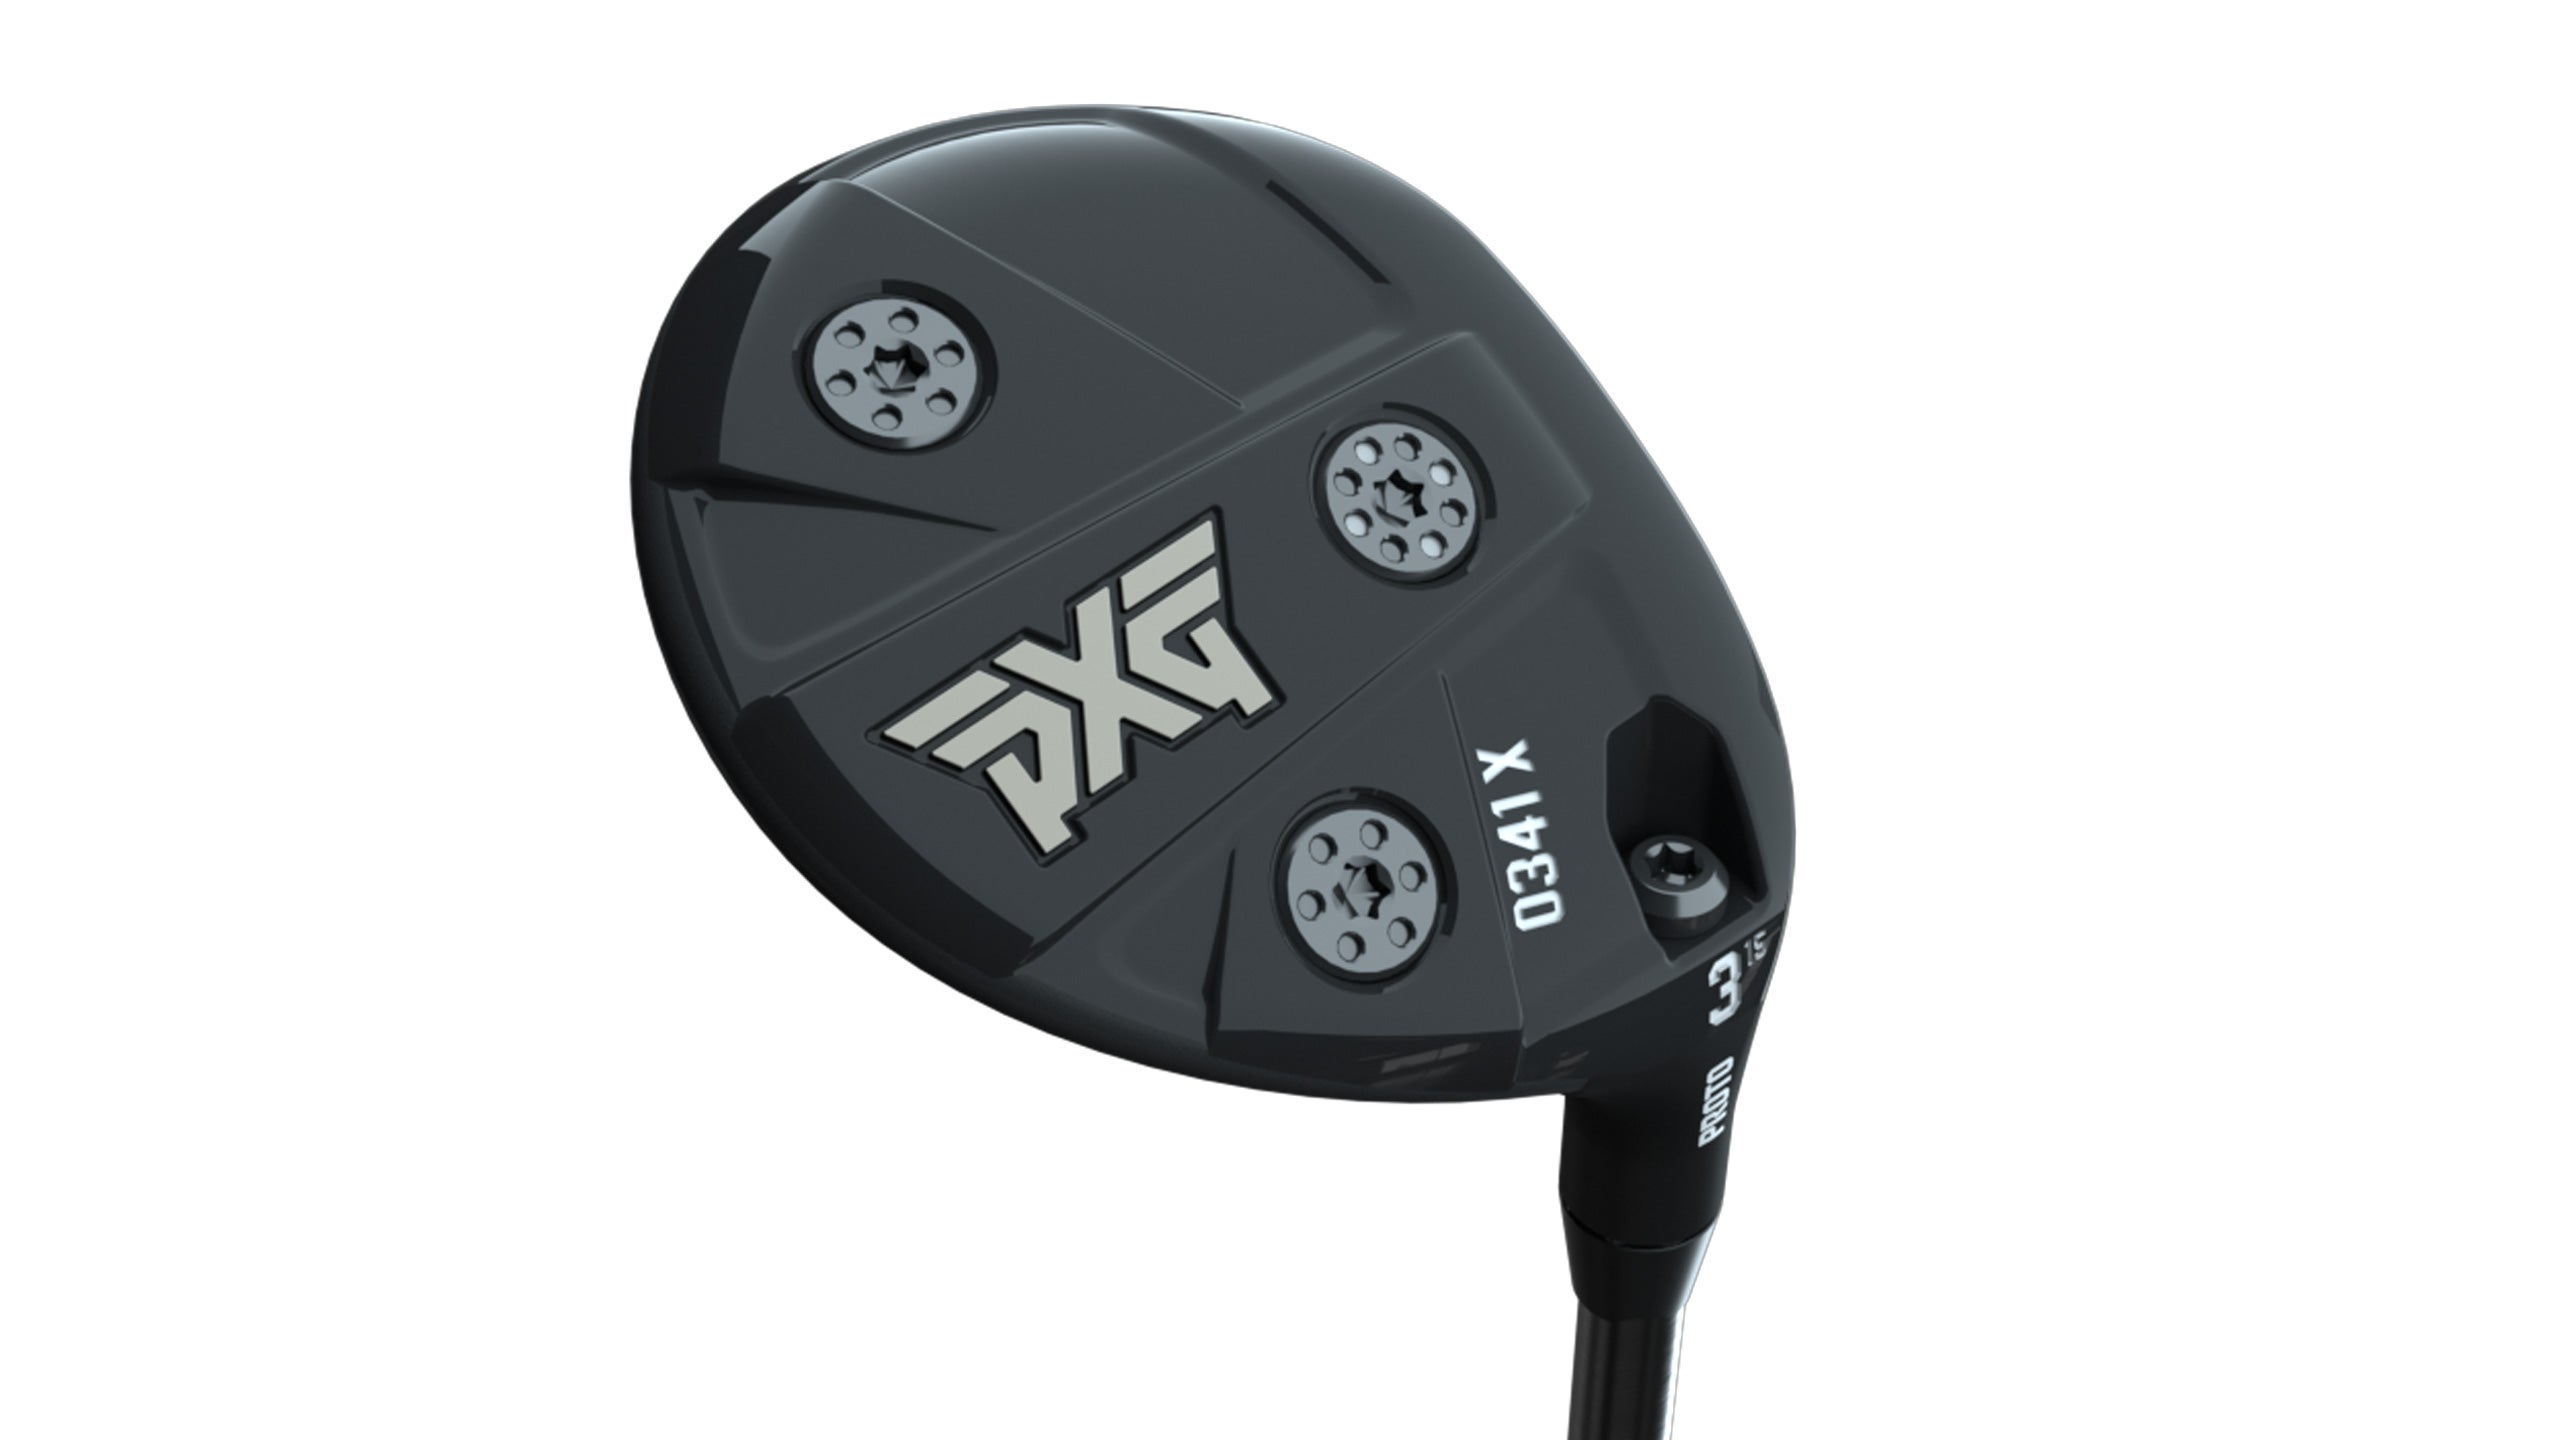 PXG 0341 X Proto fairway wood: ClubTest 2021 review